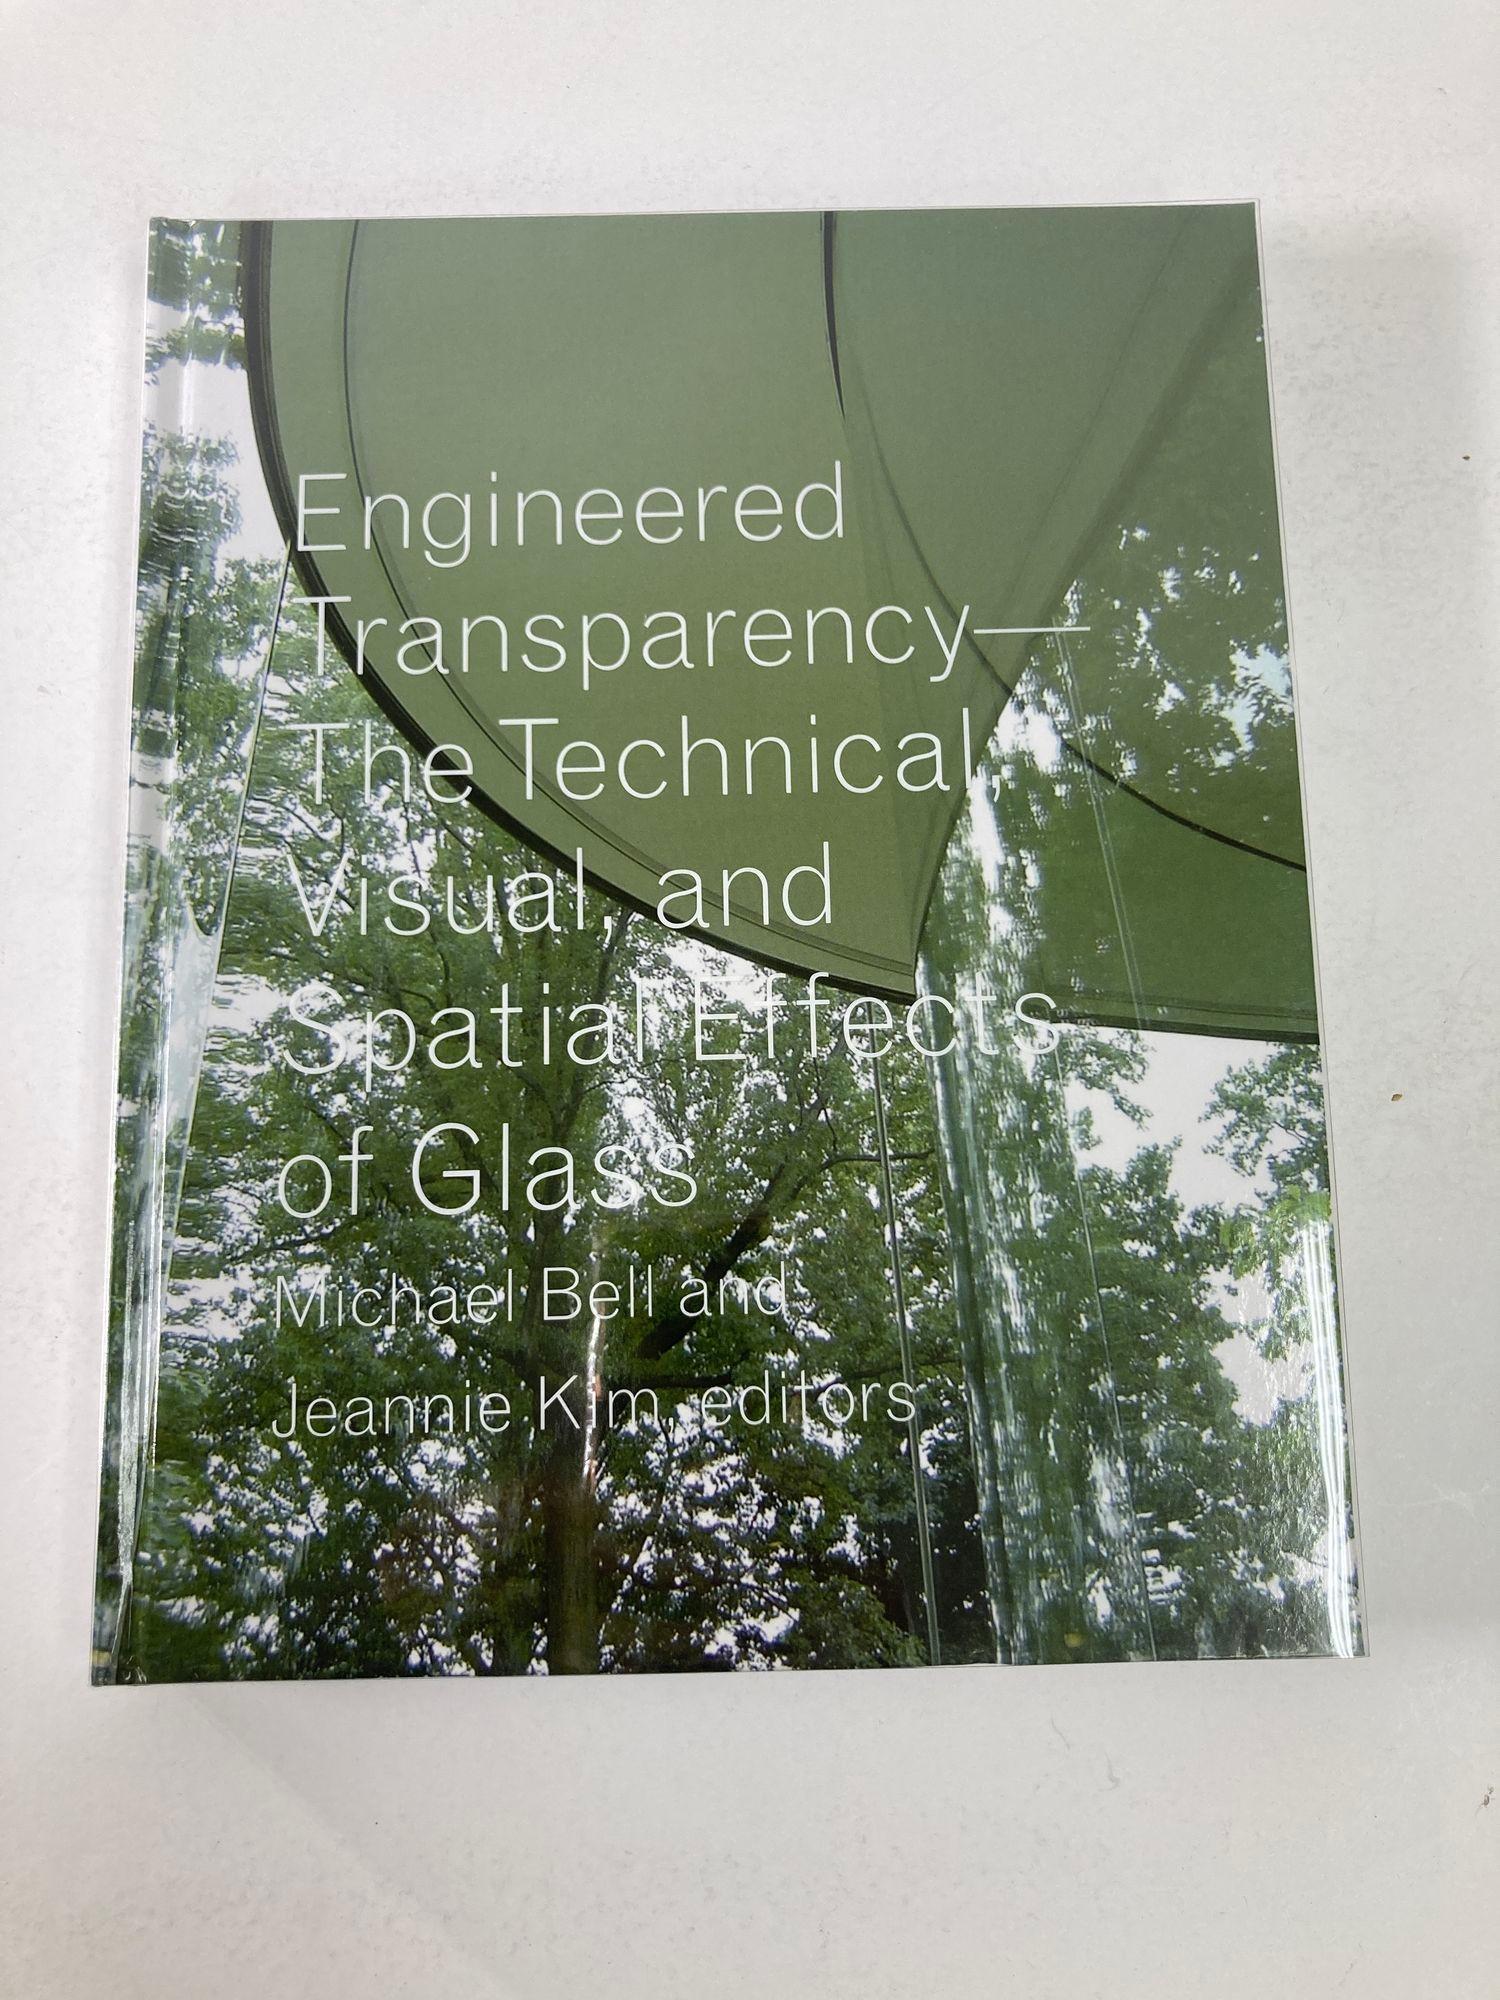 Engineered Transparency: The Technical, Visual, and Spatial Effects of Glass Hardcover Book.
February 18, 2009 by Michael Bell, Jeannie Kim.
Glass is one of the most ubiquitous and extensively researched building materials. Despite the critical